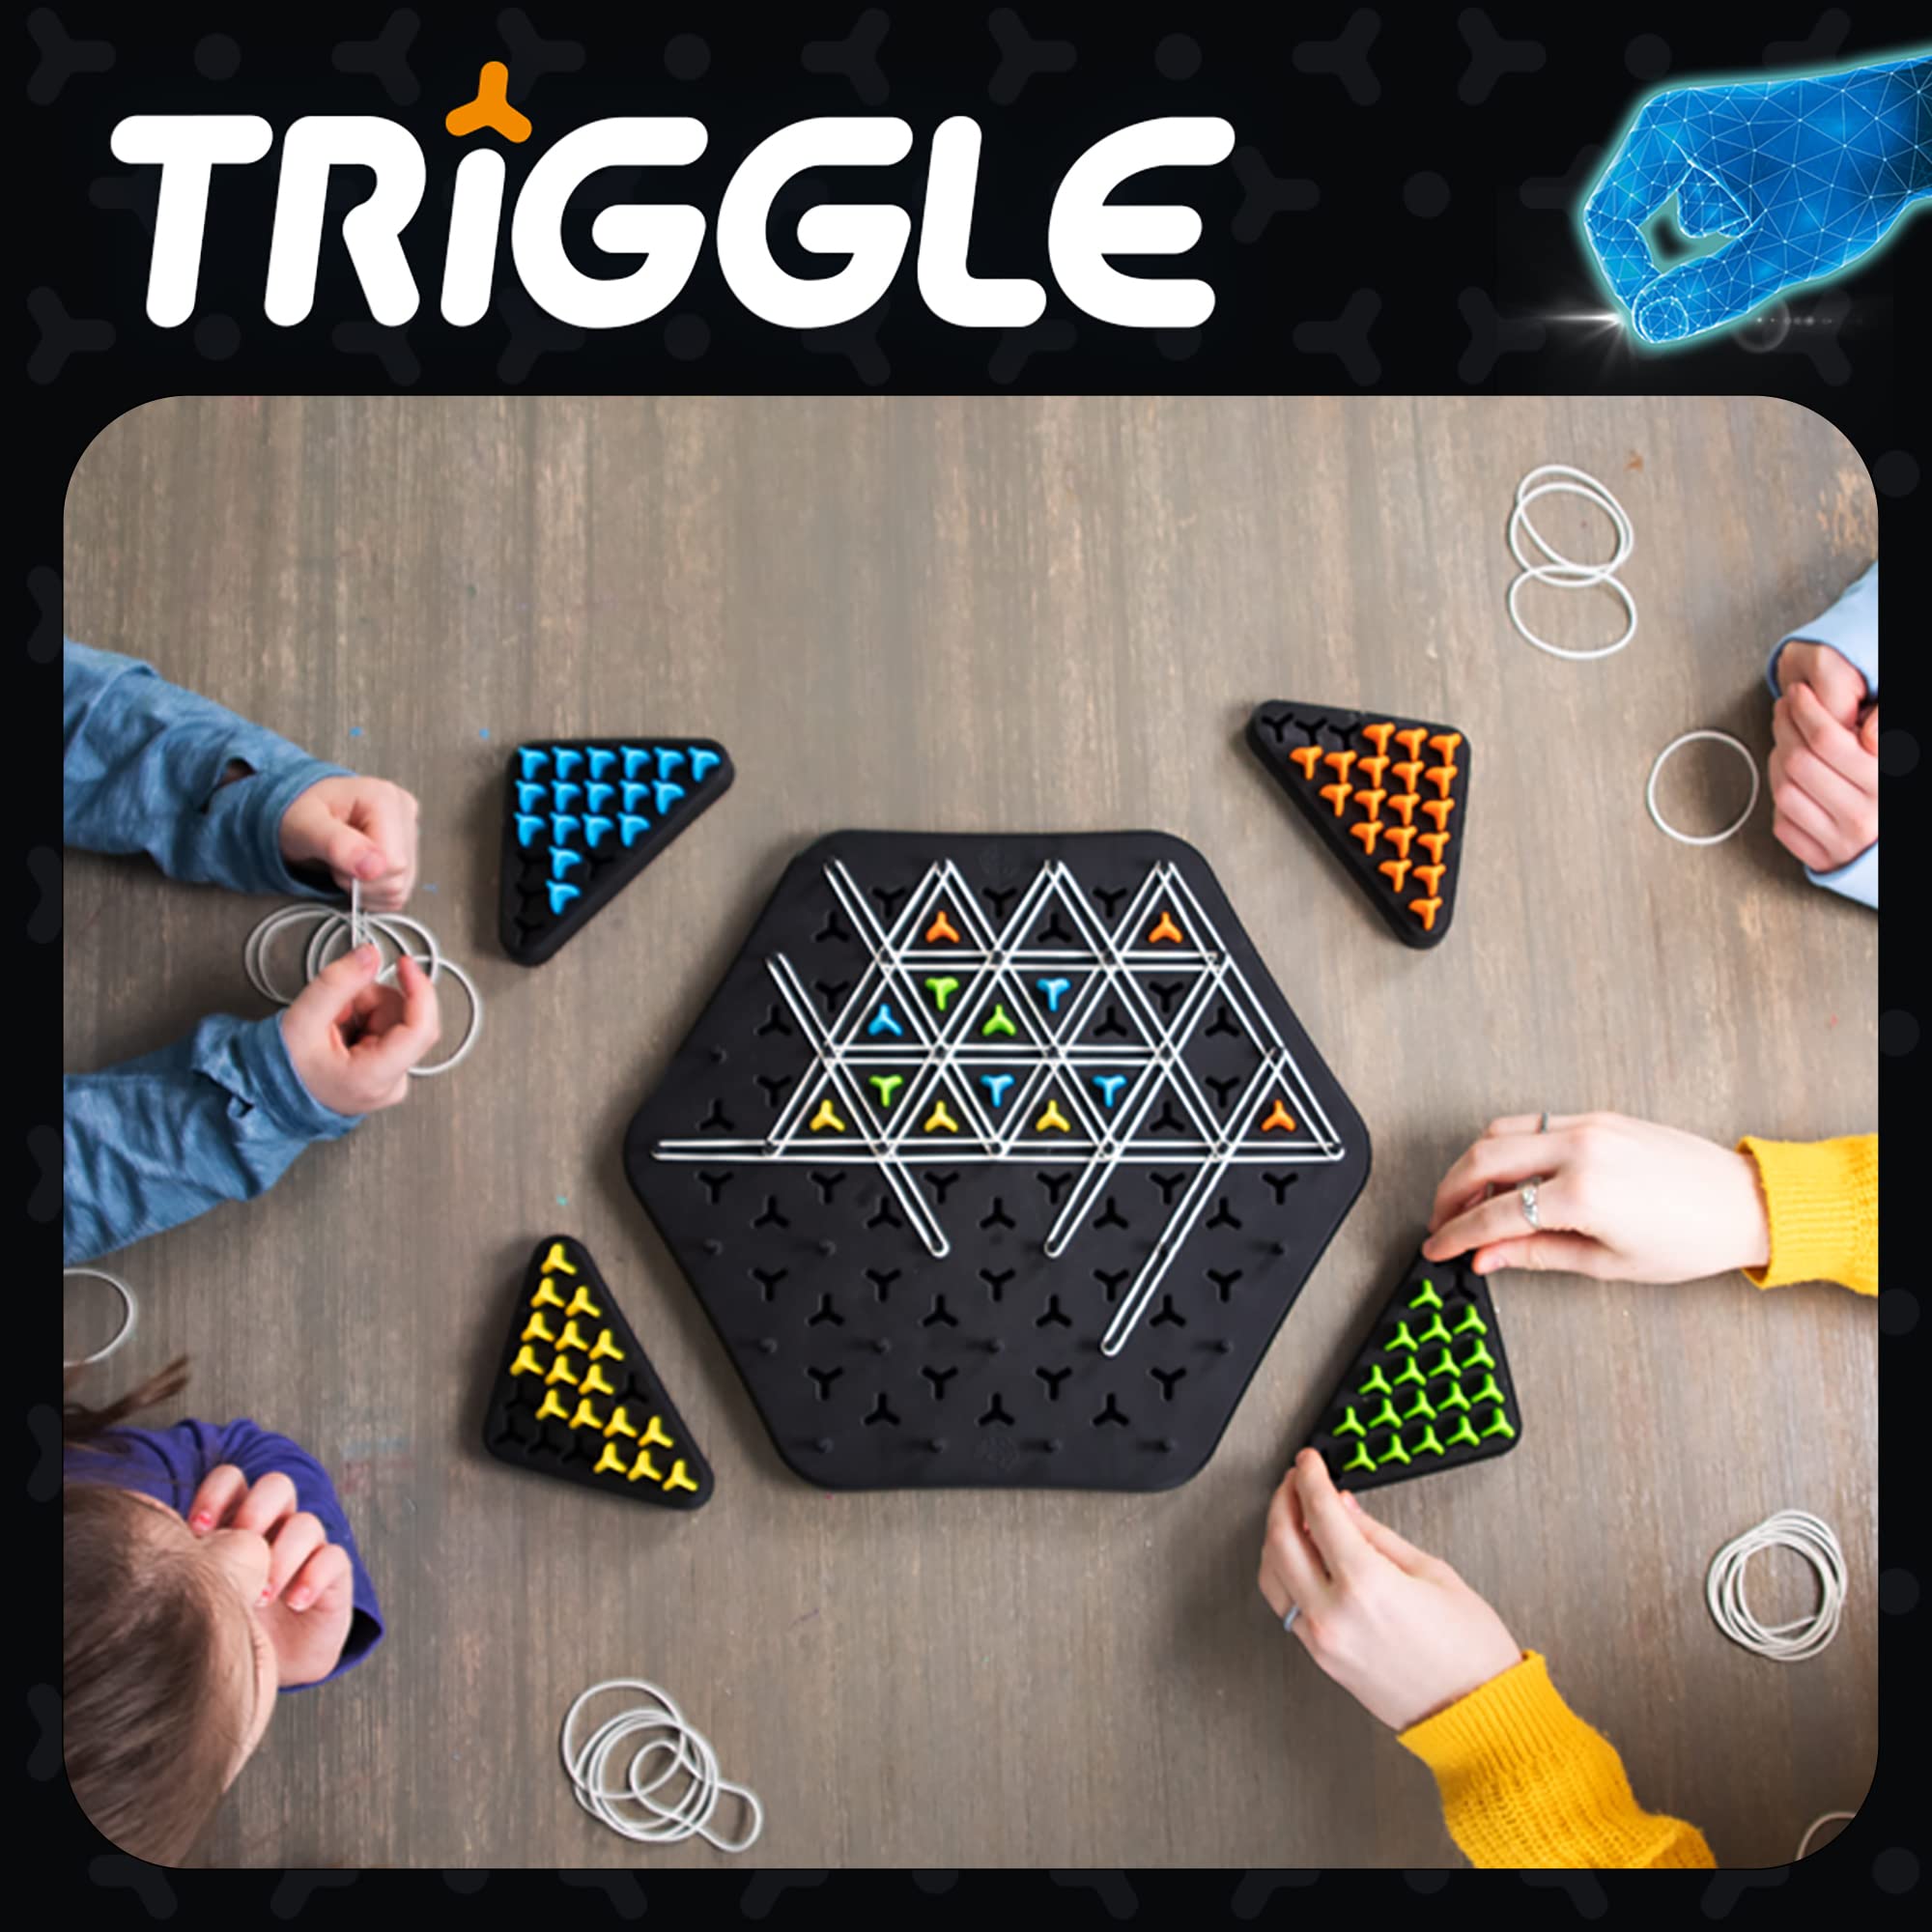 Fat Brain Toys Triggle Game | Ages 8+ | 2-4 Players | 1 Set